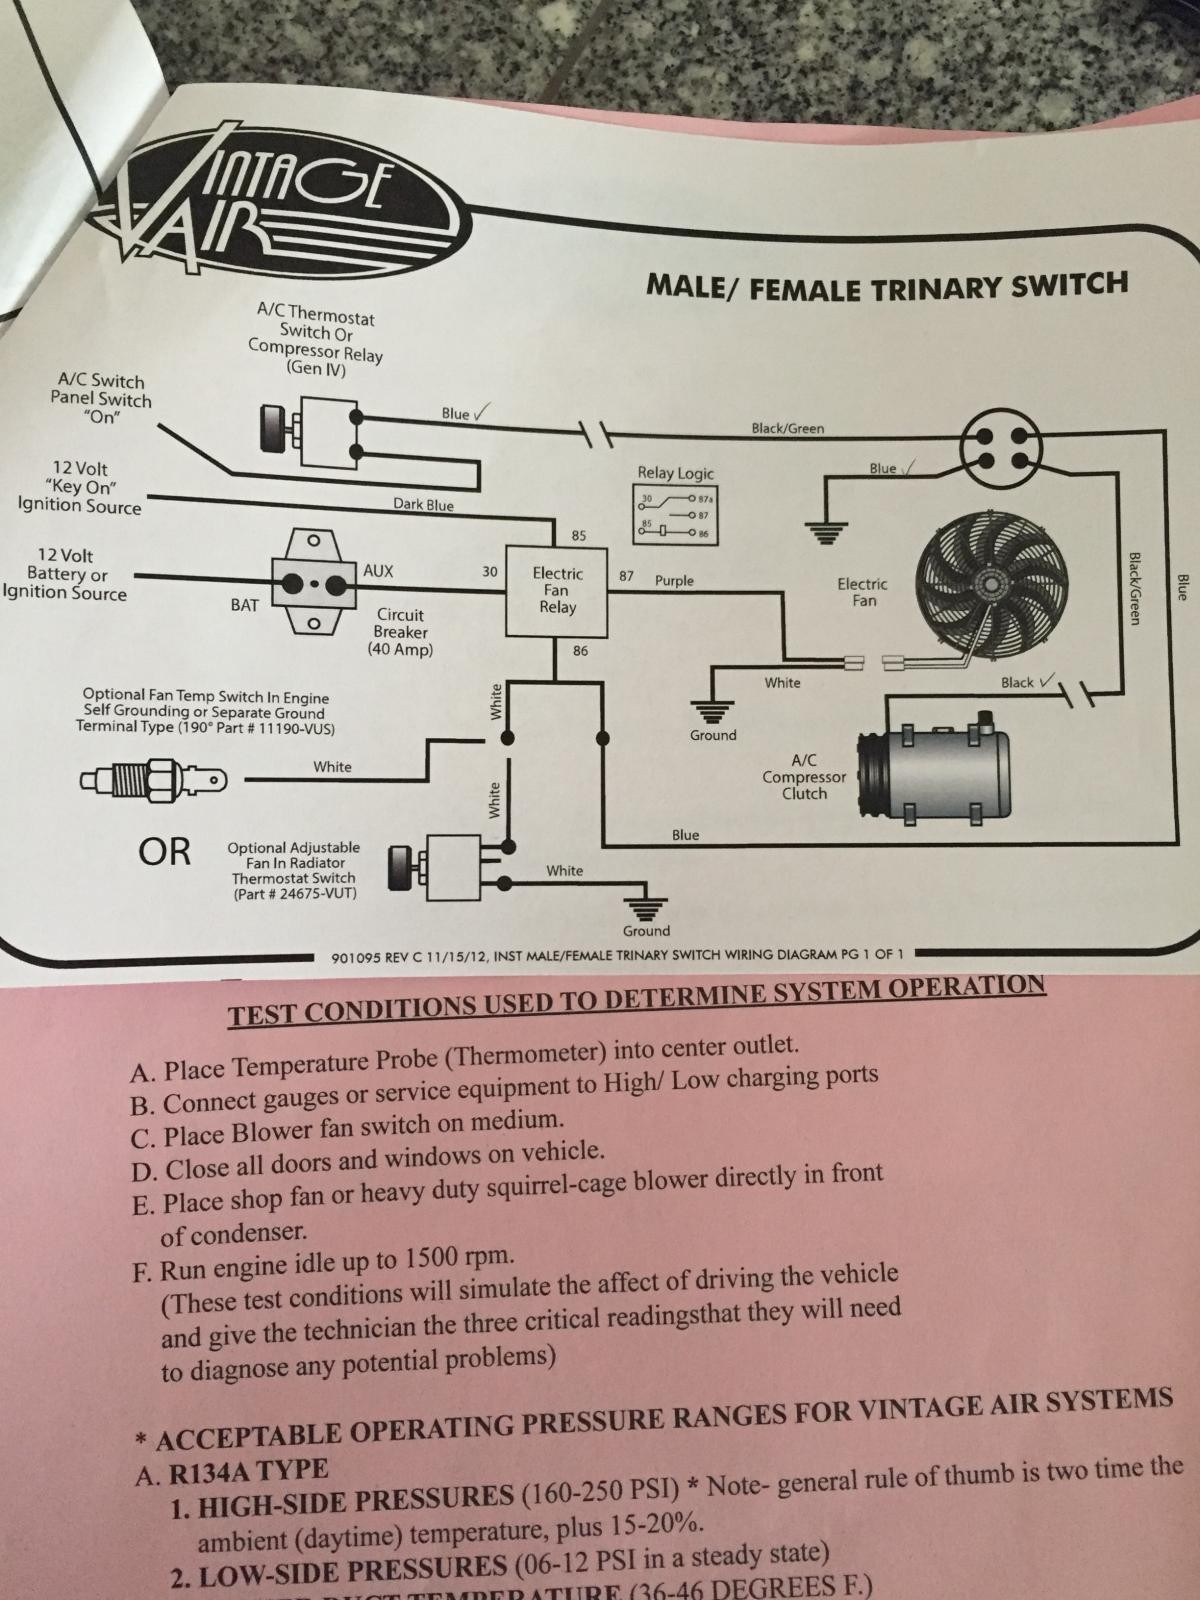 Vintage Air Gen Iv Wiring Diagram Chevy Trinary Switch Wires Beauteous